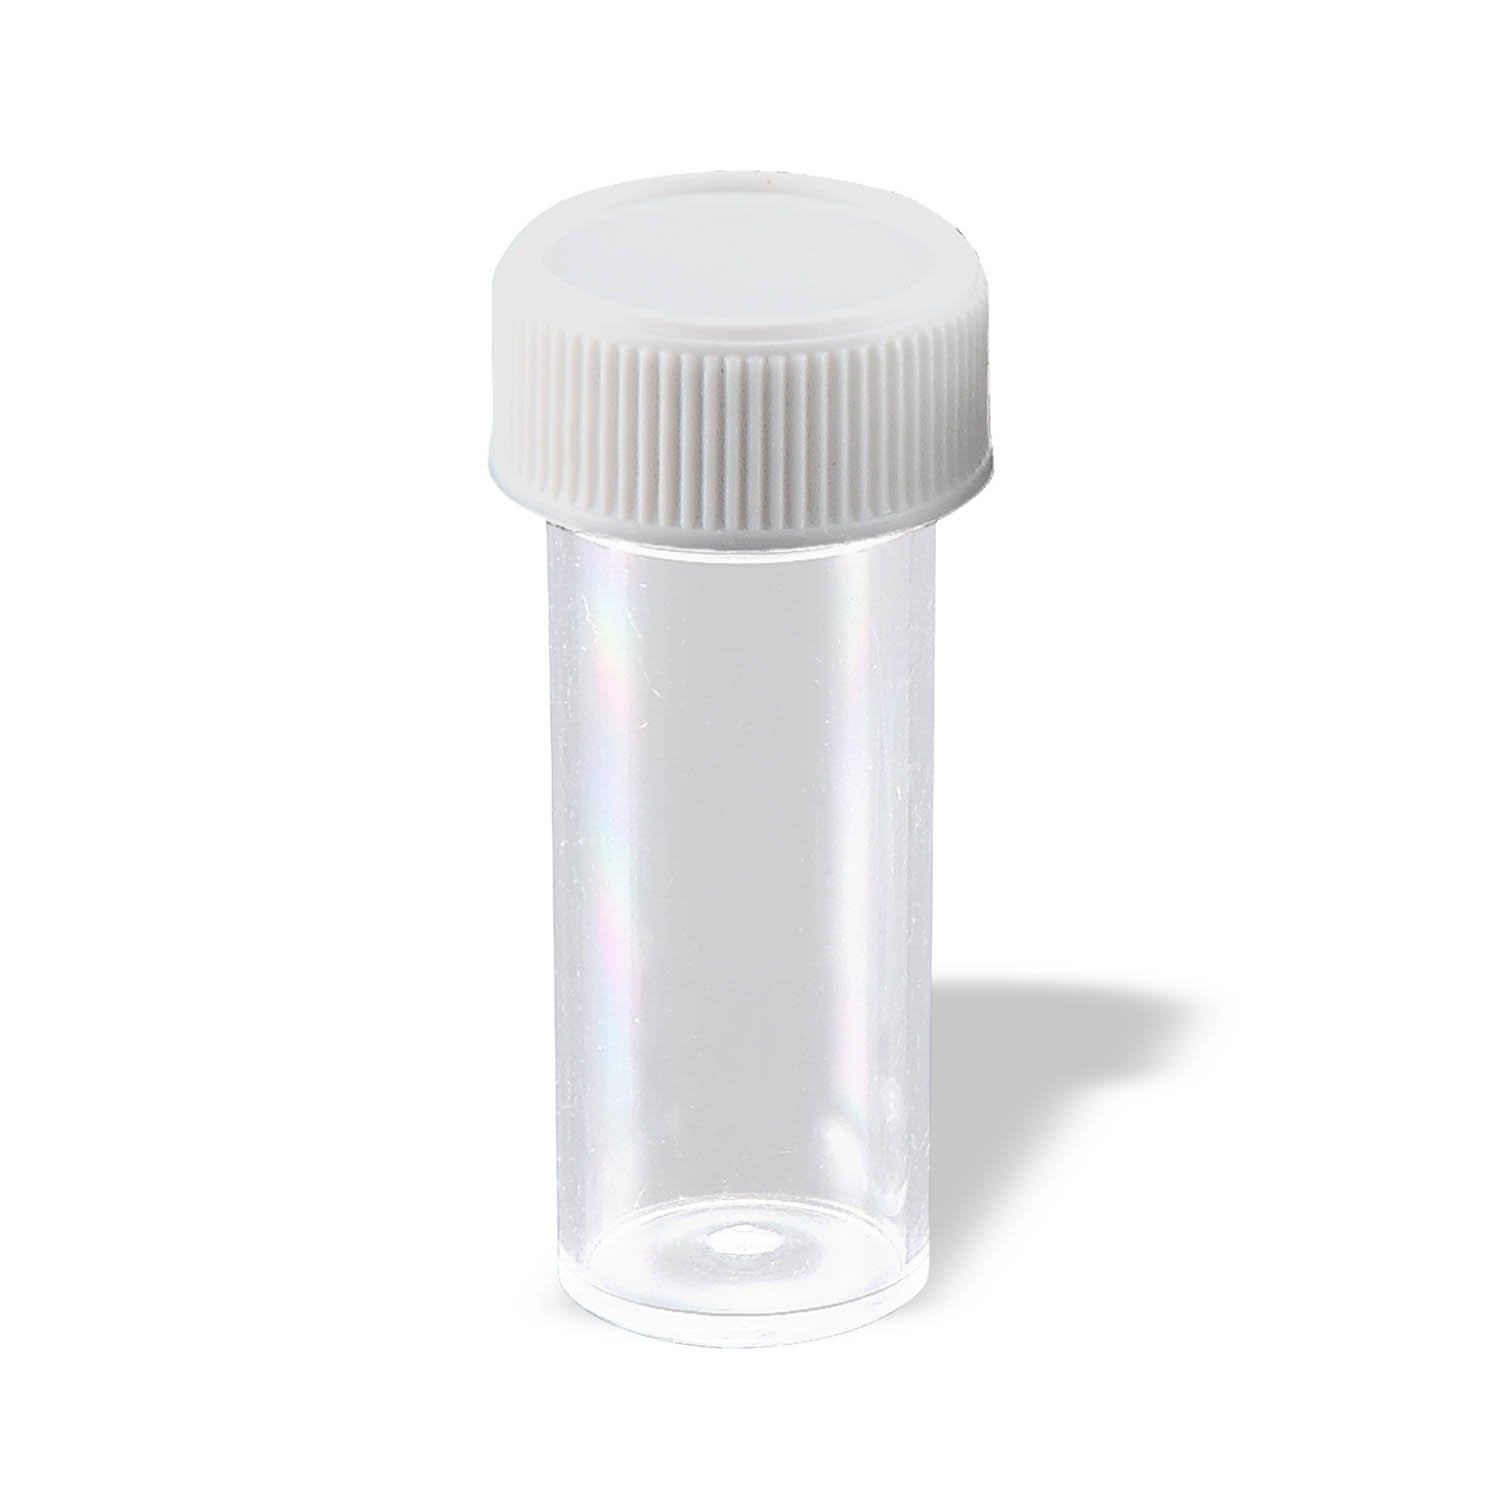 Specimen Vial with Attached Screw Cap - 7mL, Polystyrene